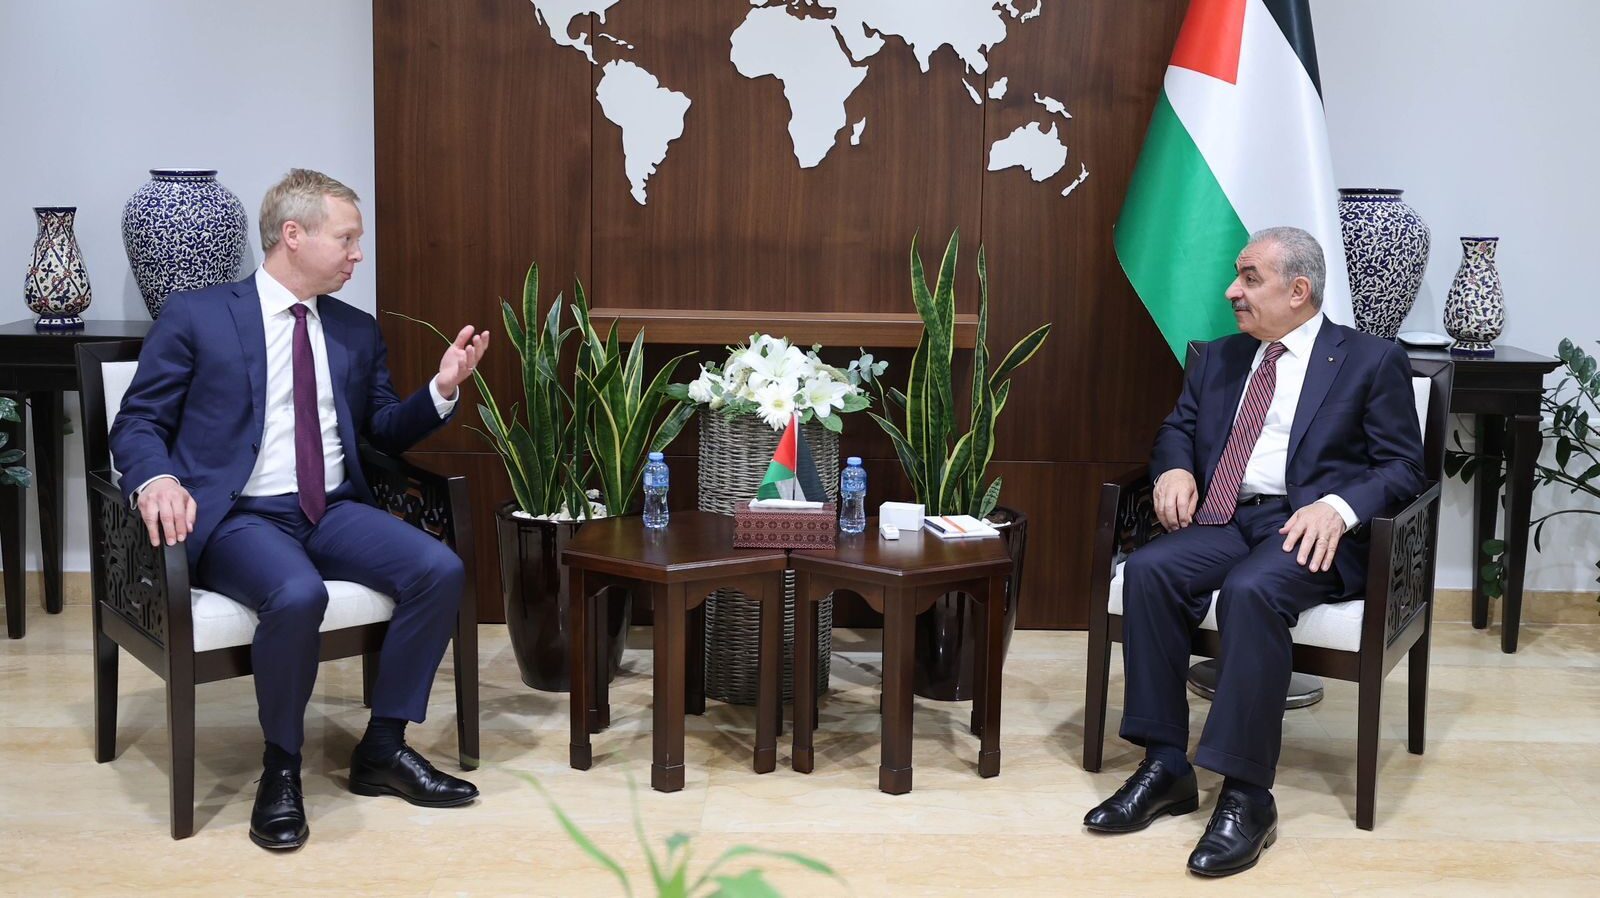 Palestinian PM Calls for Int’l Support To Safeguard 2-State Solution